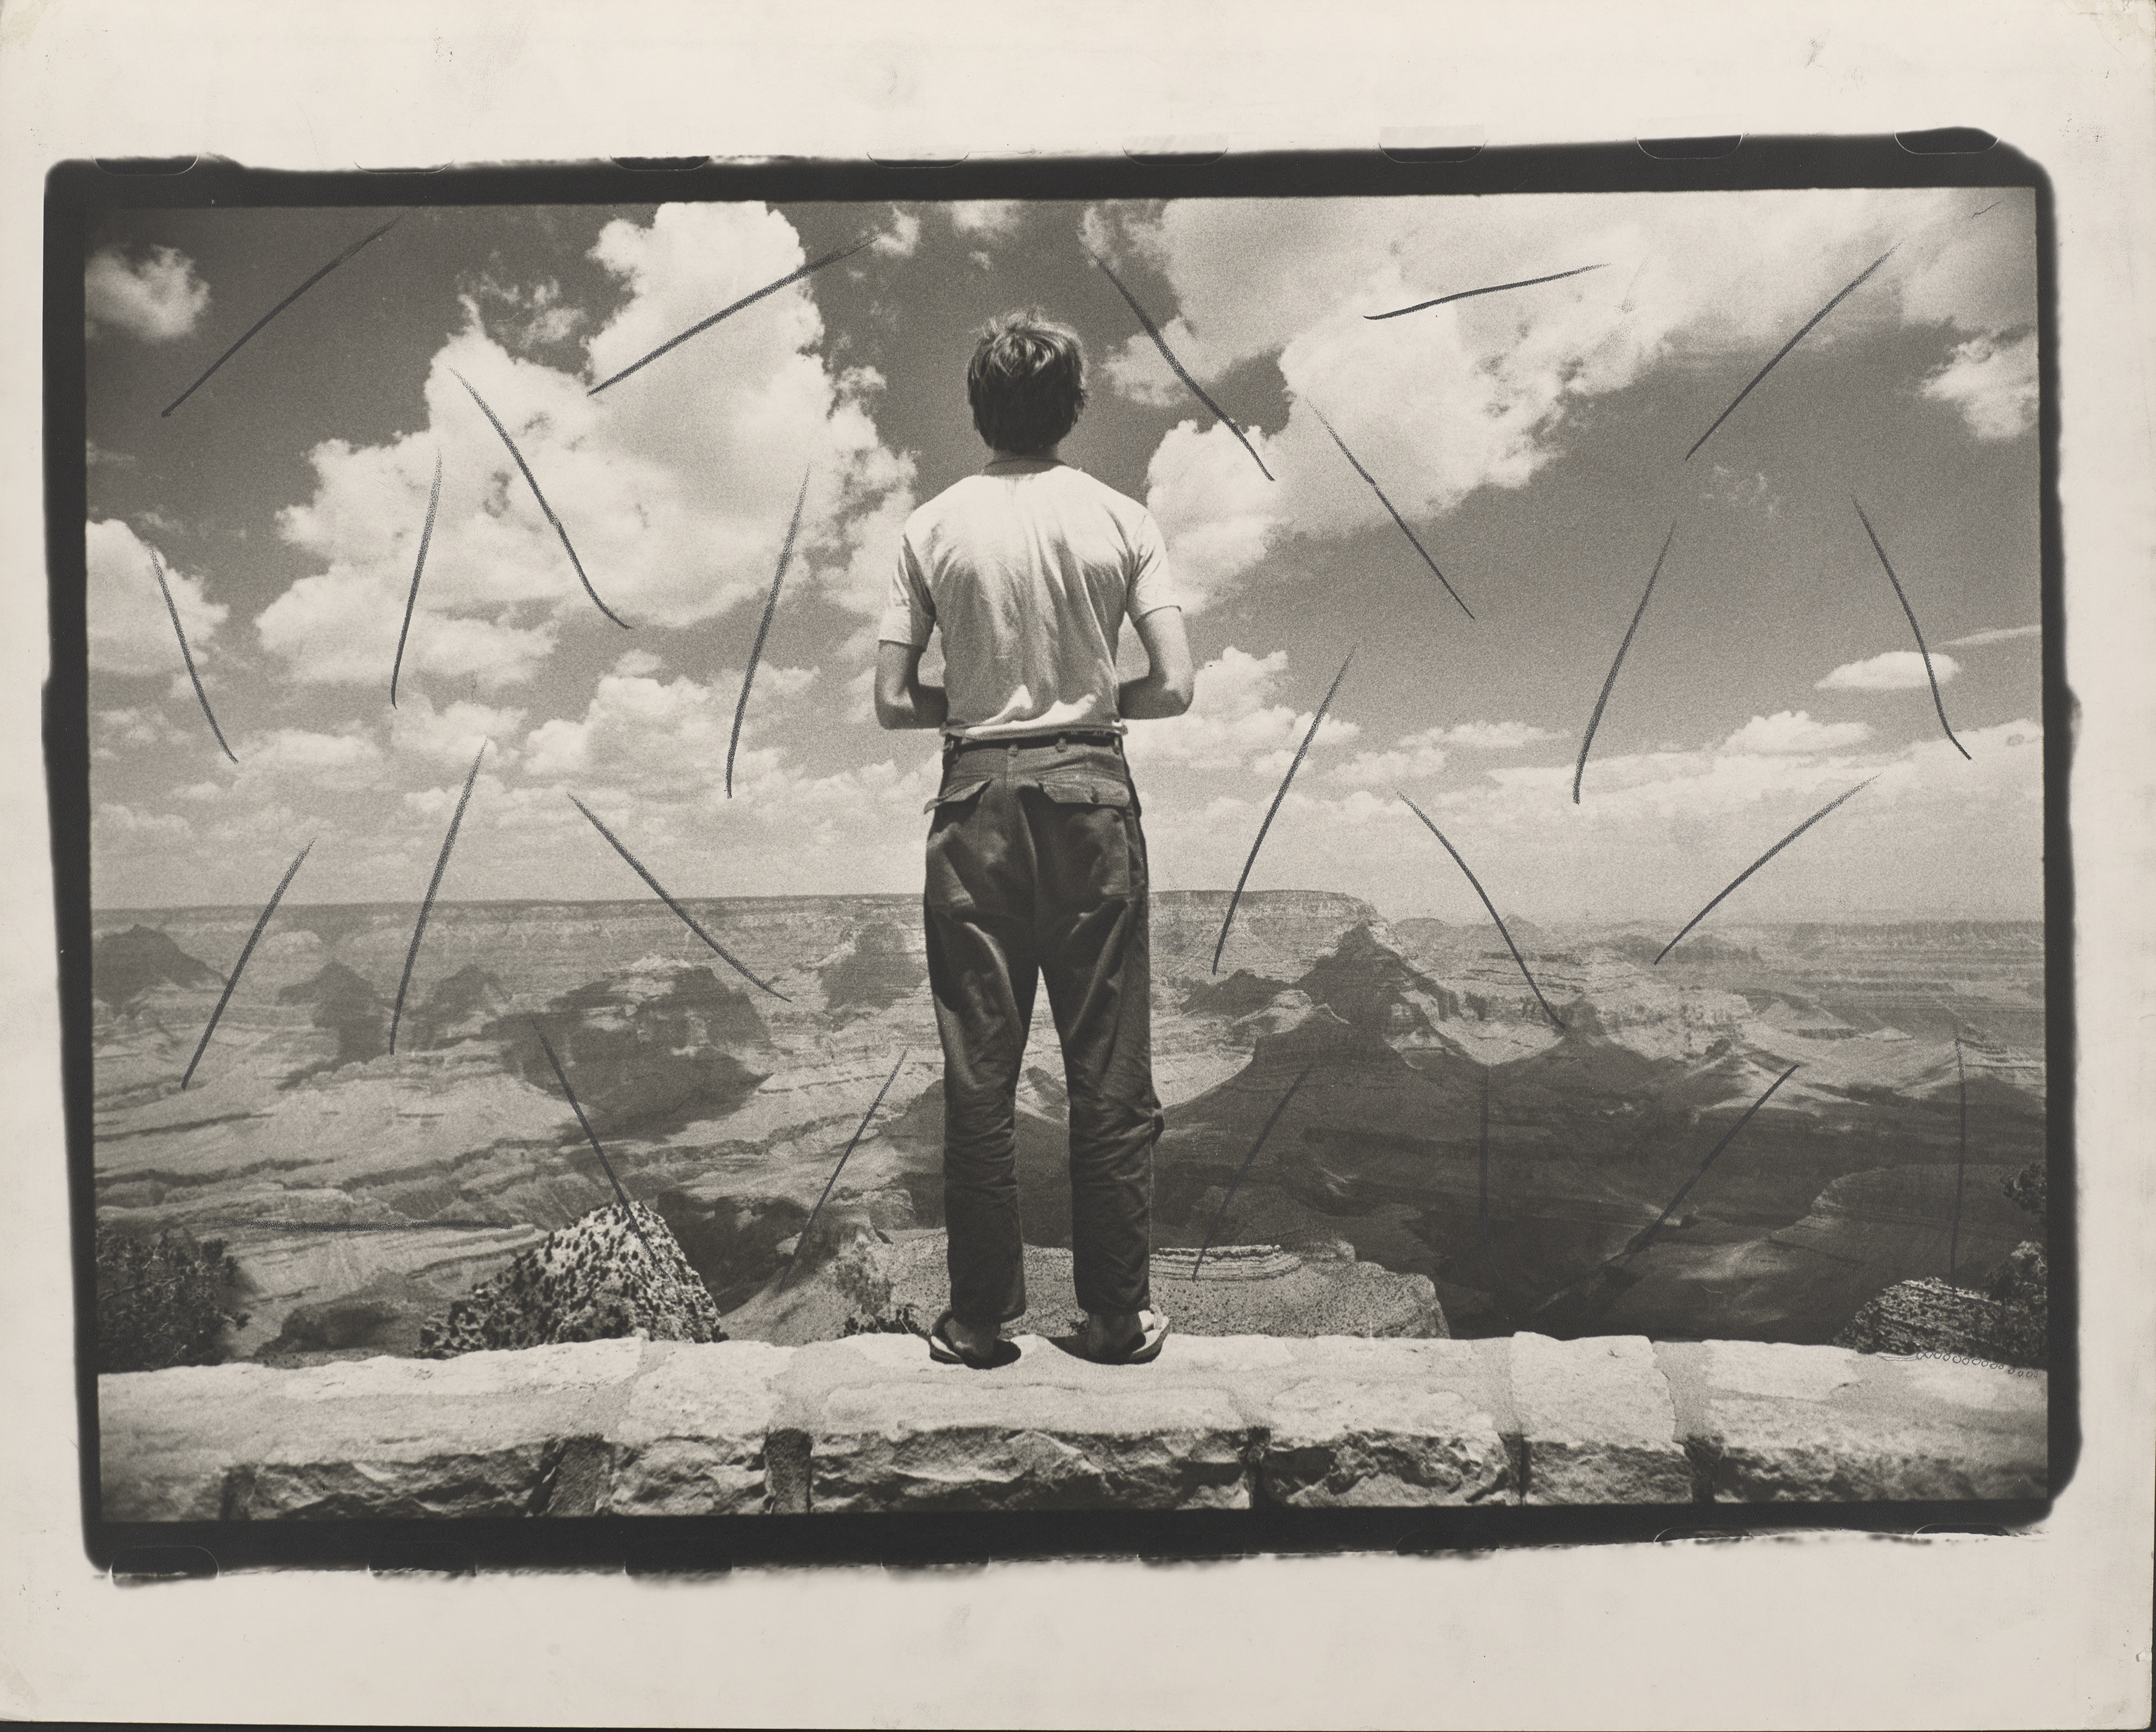 Photograph of a man staring out over a desert valley by Marcia Resnick.